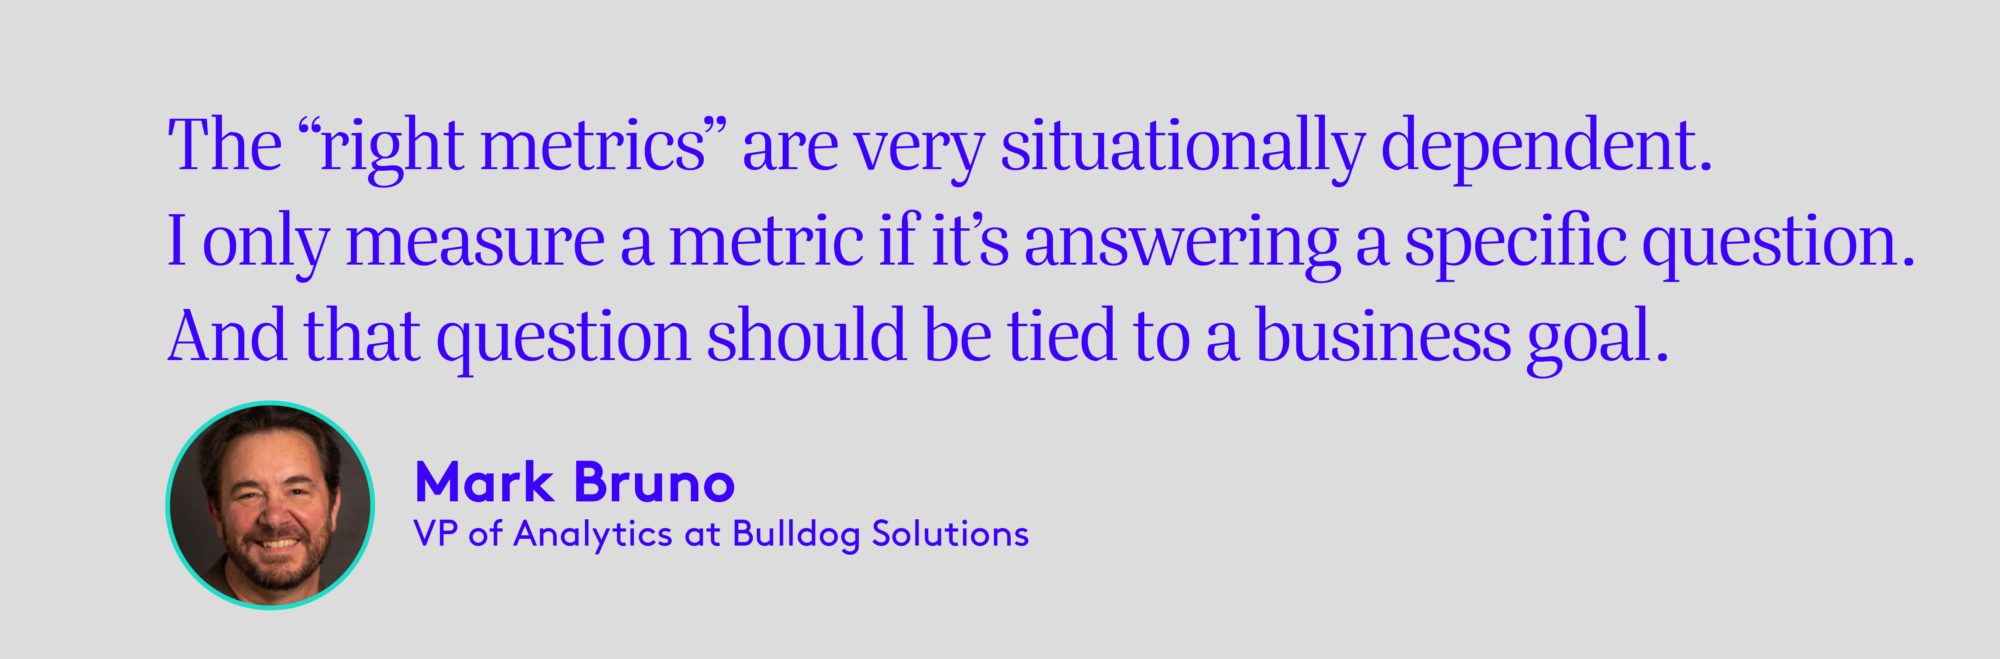 Image with picture of Mark Bruno, VP Analytics at Building Solutions